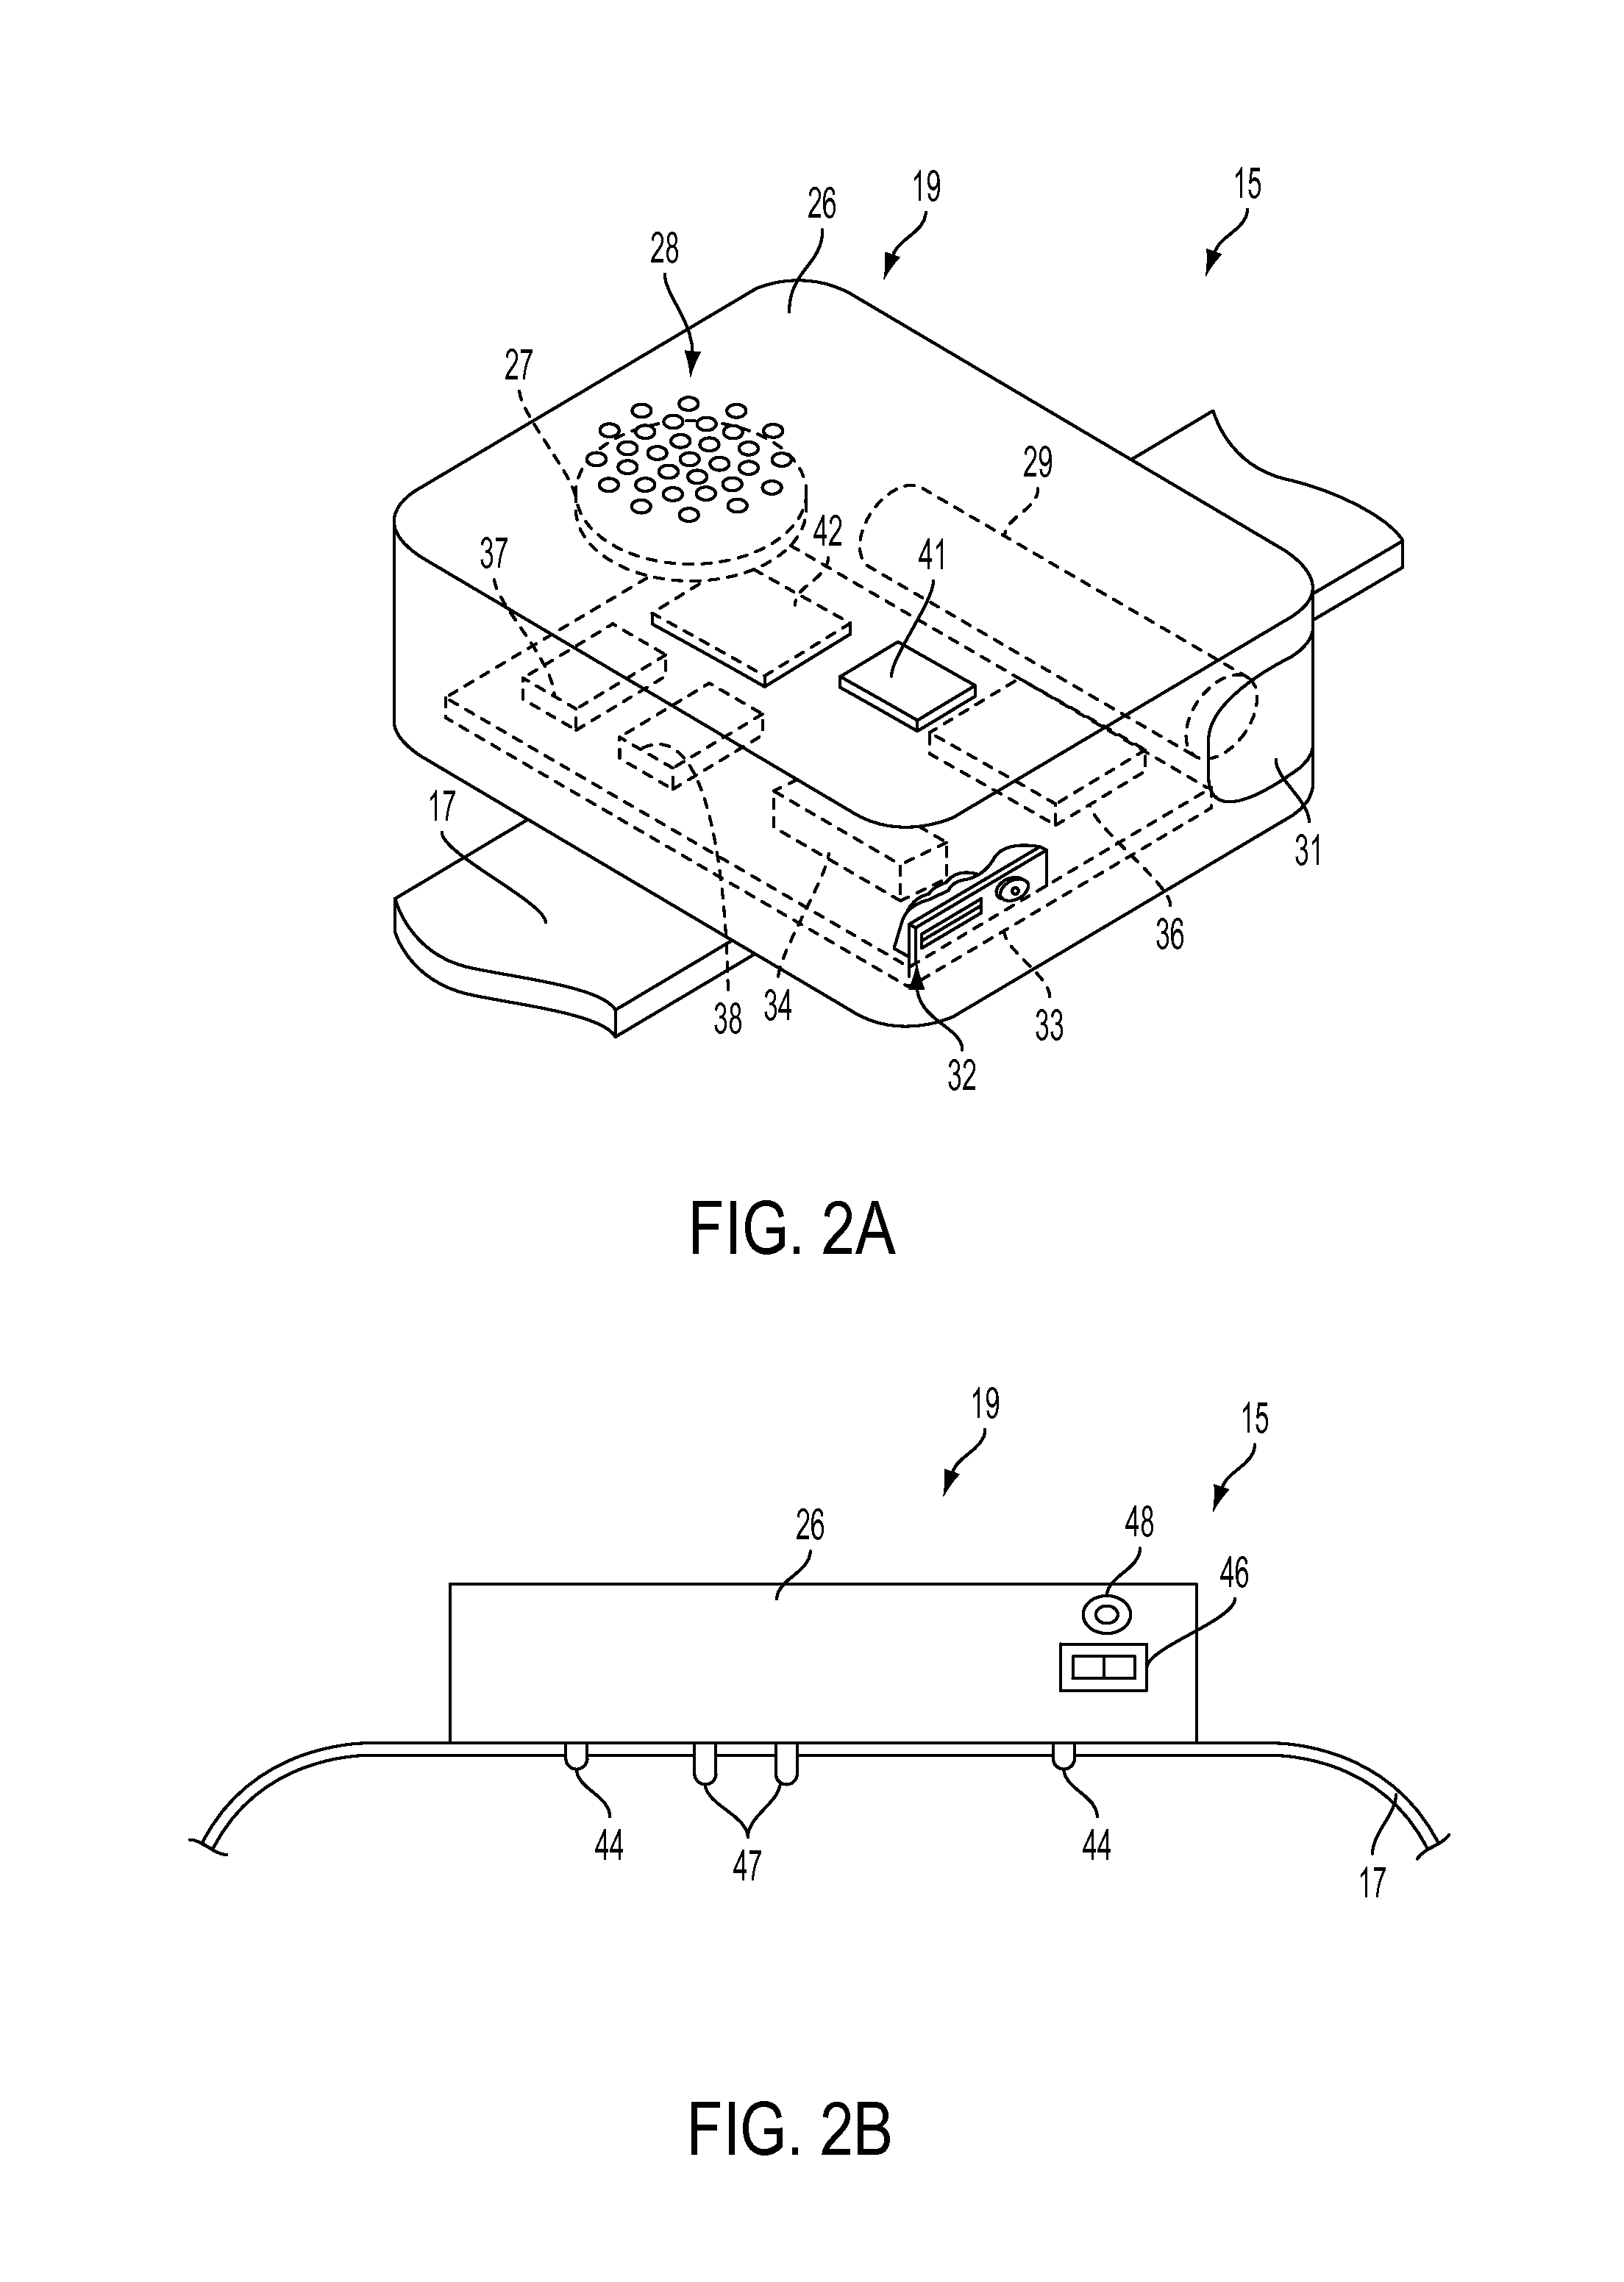 System and method for remote guidance of an animal to and from a target destination